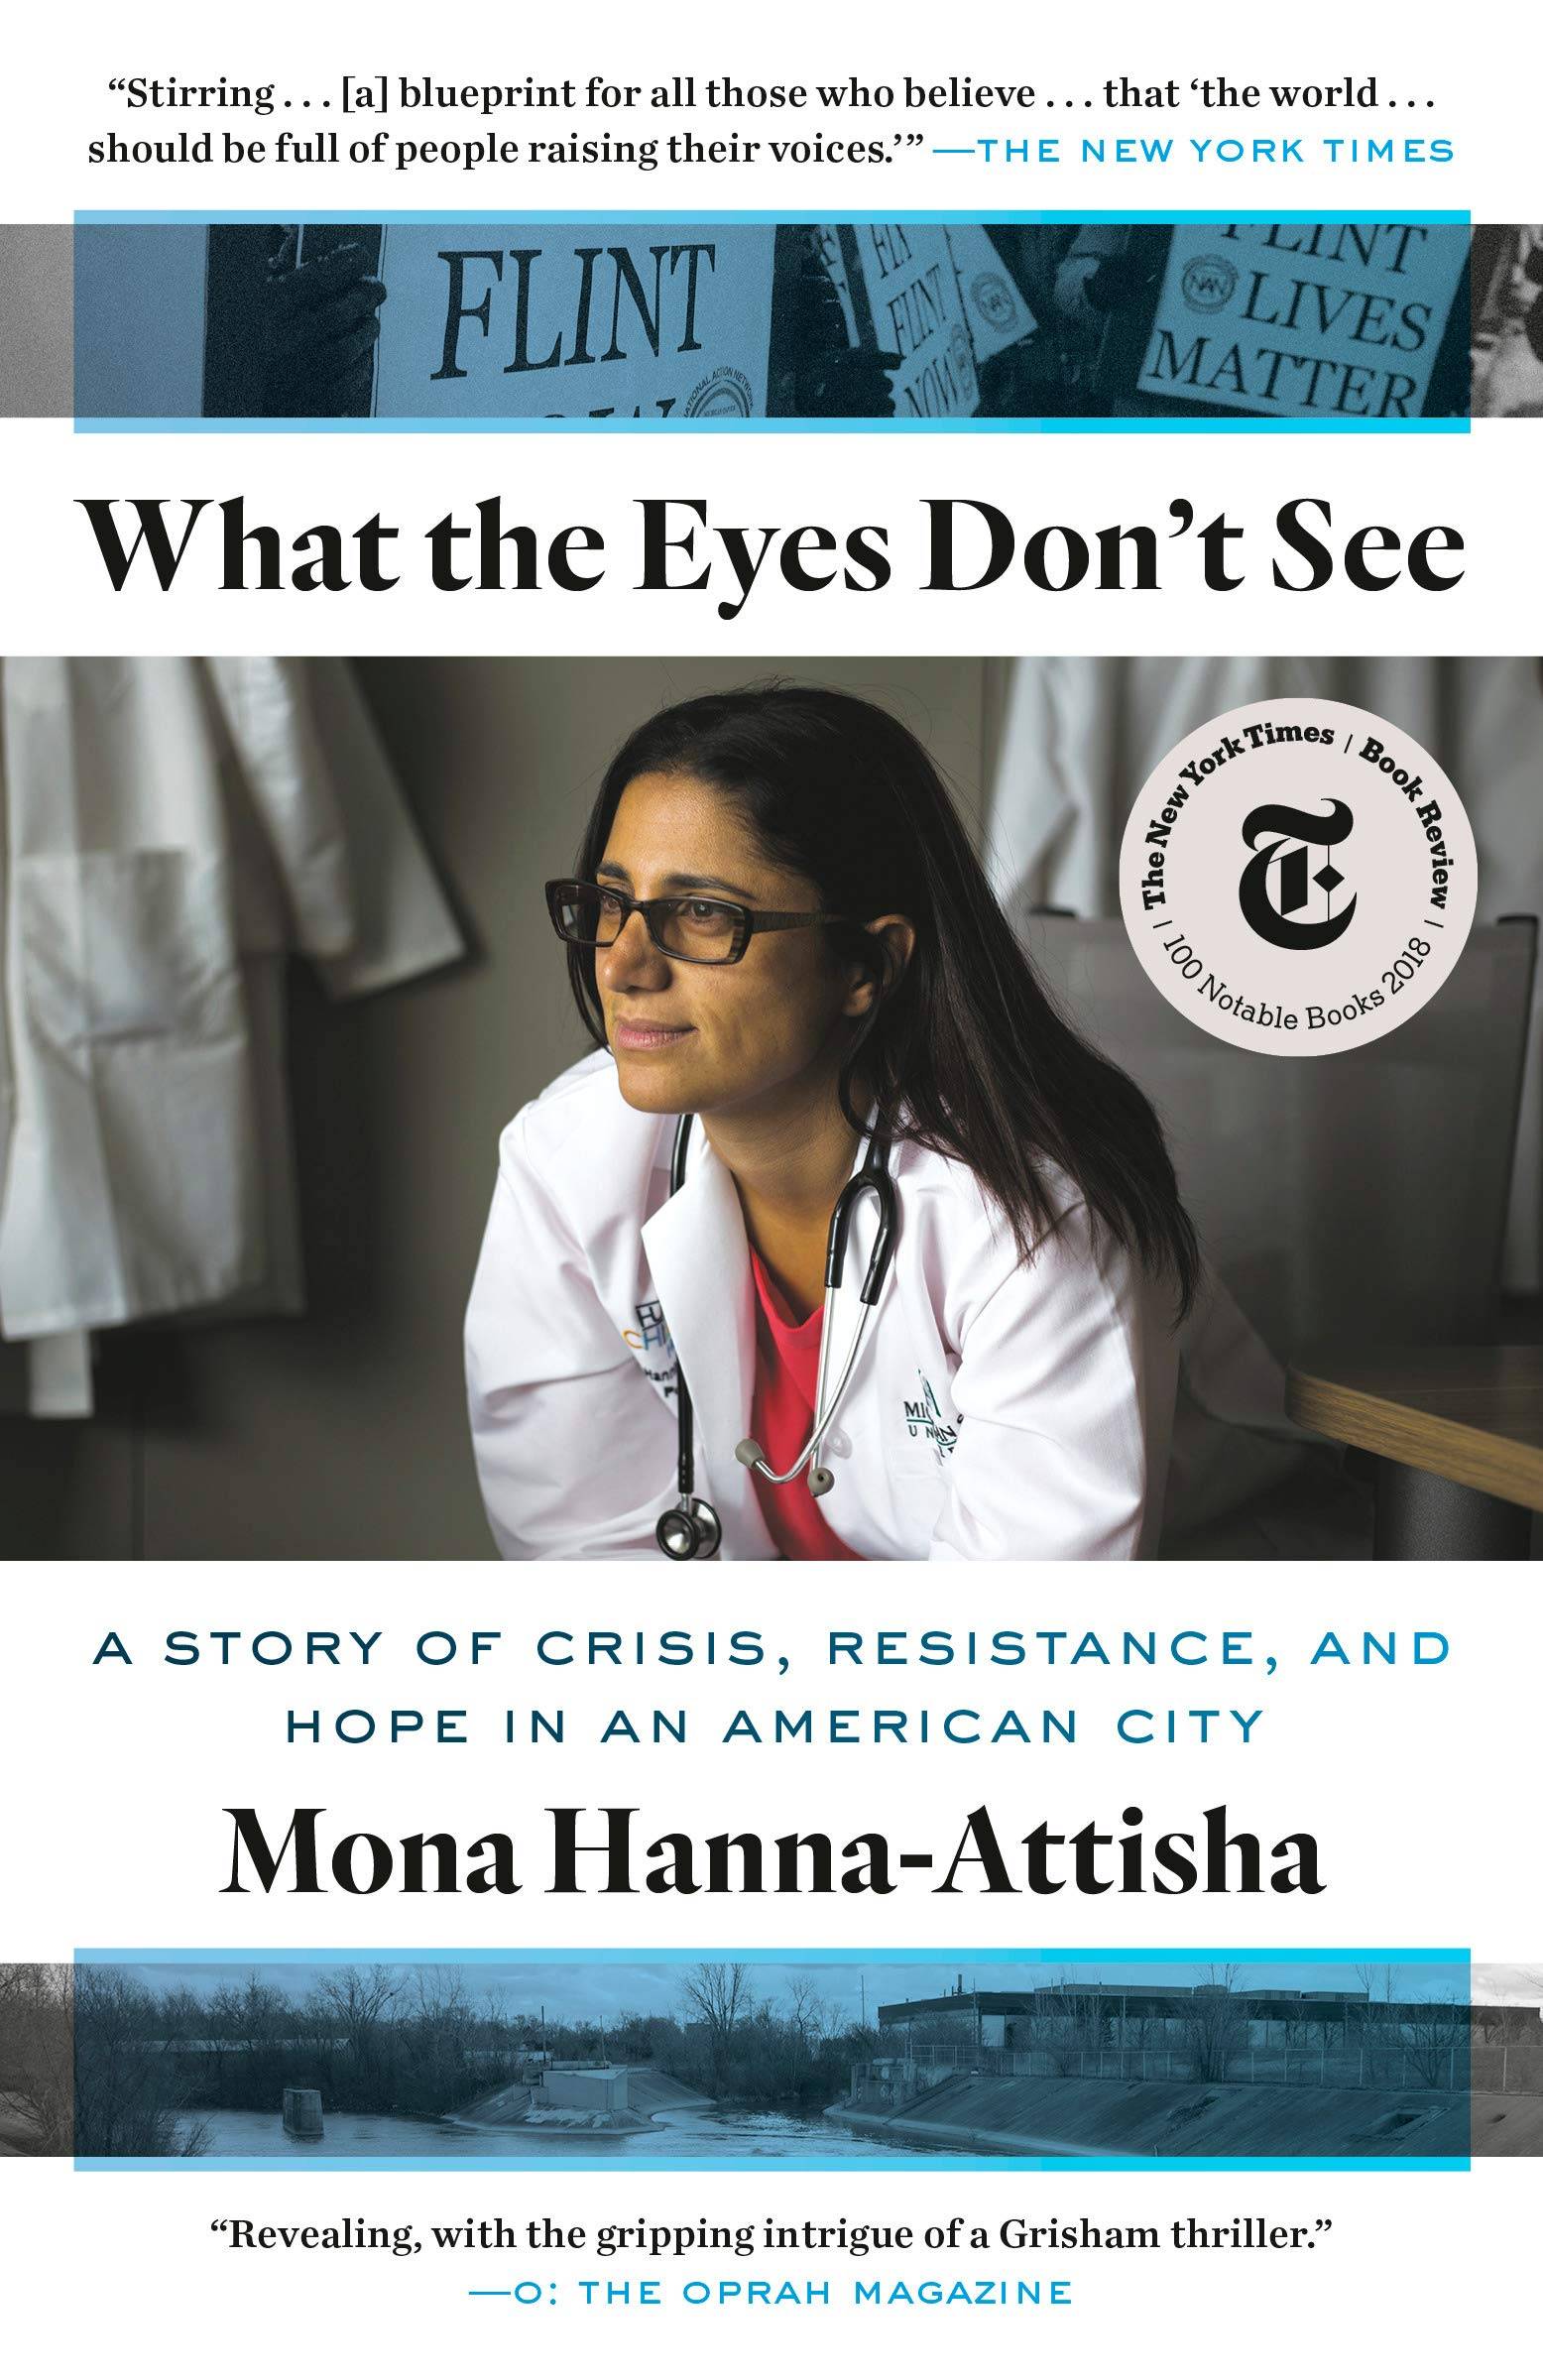 "What the eyes don't see" book cover